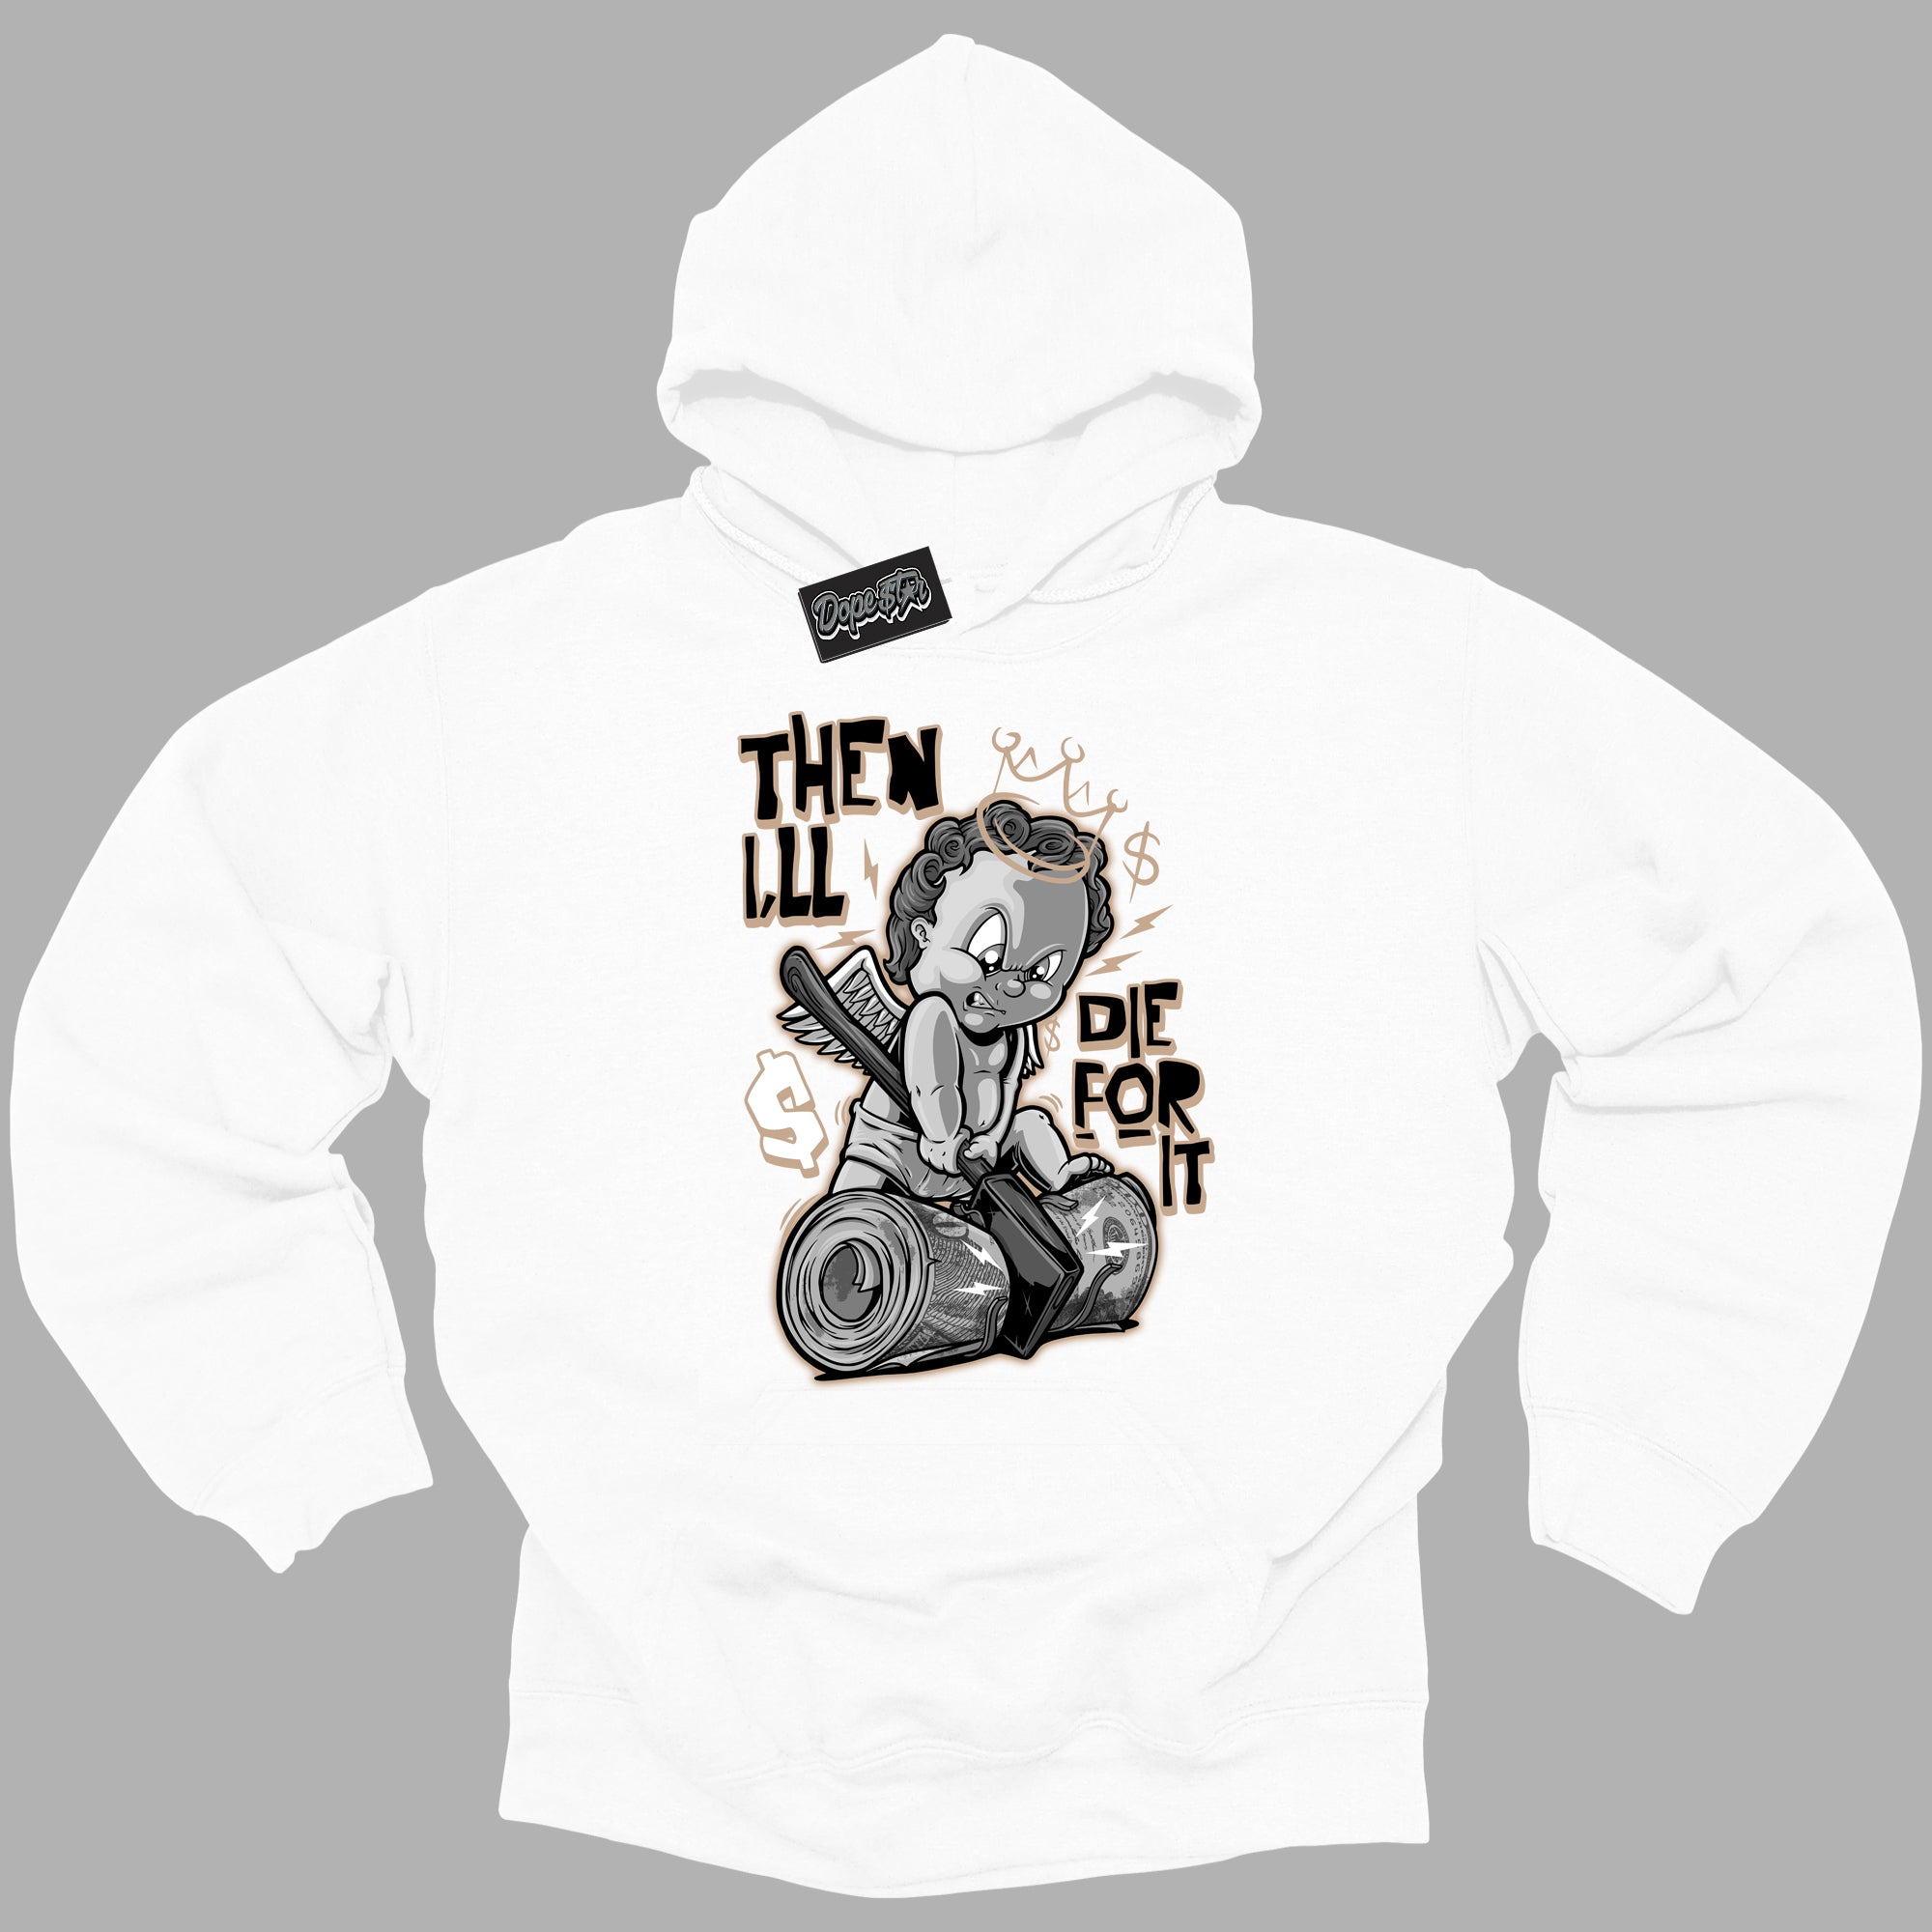 Cool White Graphic DopeStar Hoodie with “ Then I'll “ print, that perfectly matches Palomino 1s sneakers